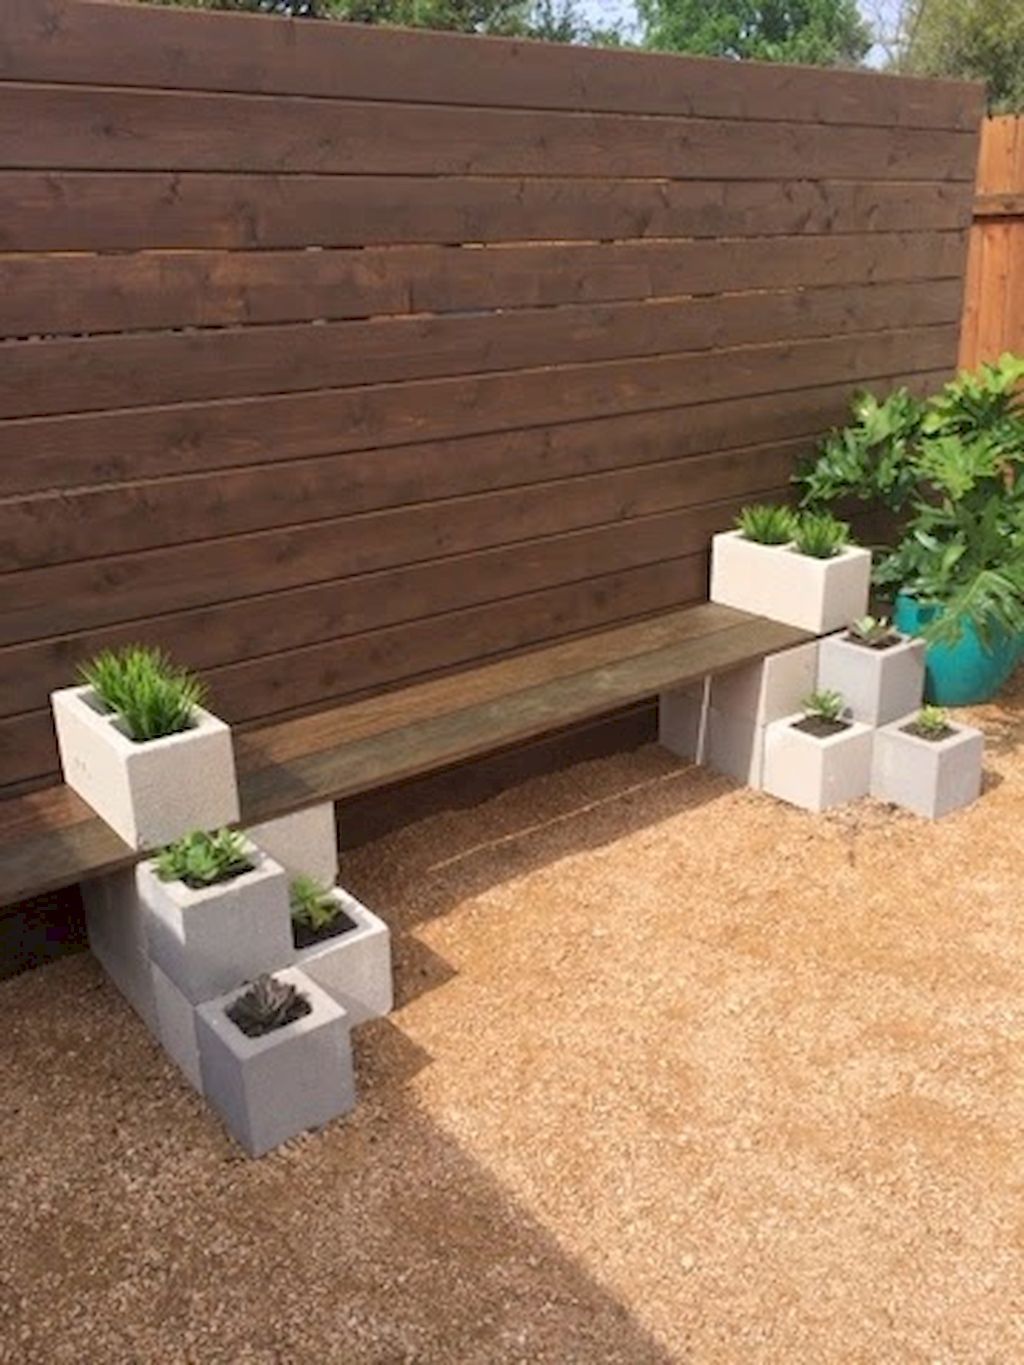 Backyard DIY Projects : Cinder Blocks -   17 diy projects for the home backyards ideas